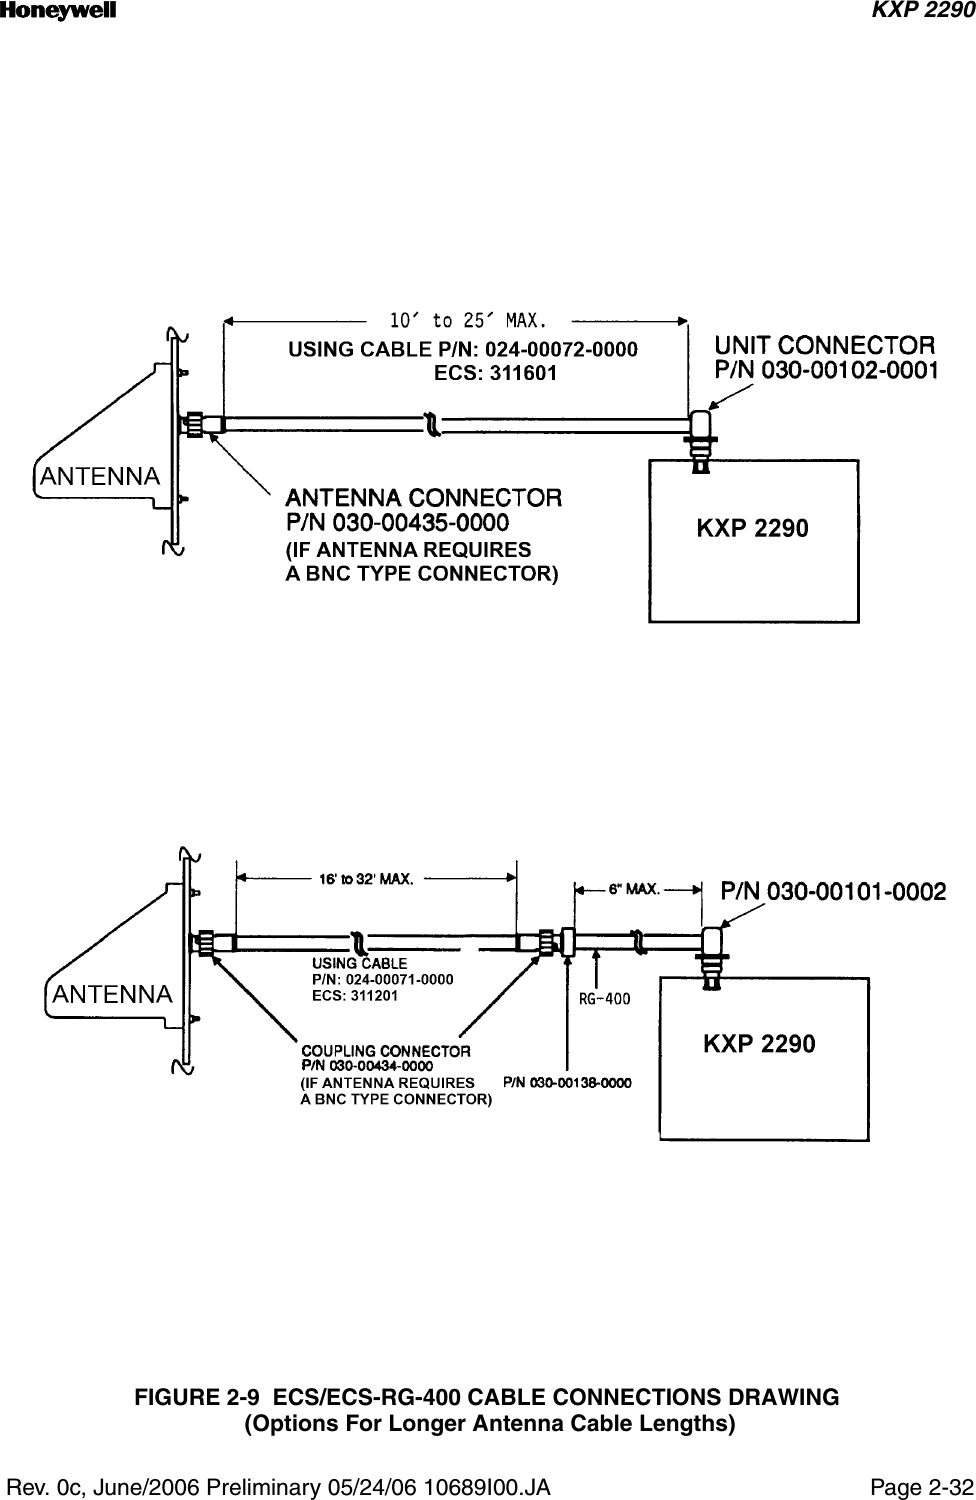 n KXP 2290 Rev. 0c, June/2006 Preliminary 05/24/06 10689I00.JA Page 2-32FIGURE 2-9  ECS/ECS-RG-400 CABLE CONNECTIONS DRAWING (Options For Longer Antenna Cable Lengths)